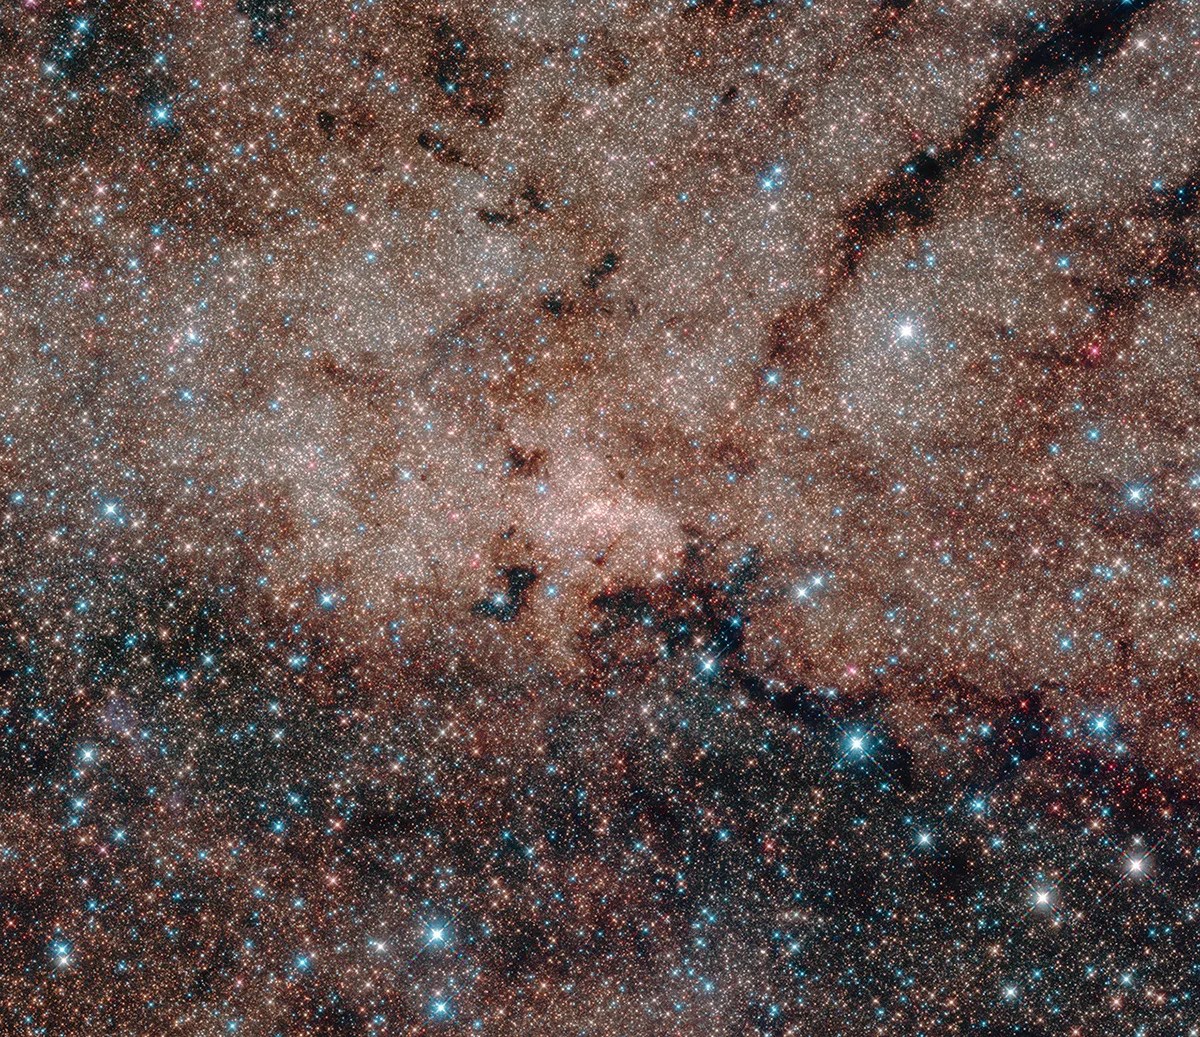 A field of stars crowd the image, with brown dust interlaced throughout.